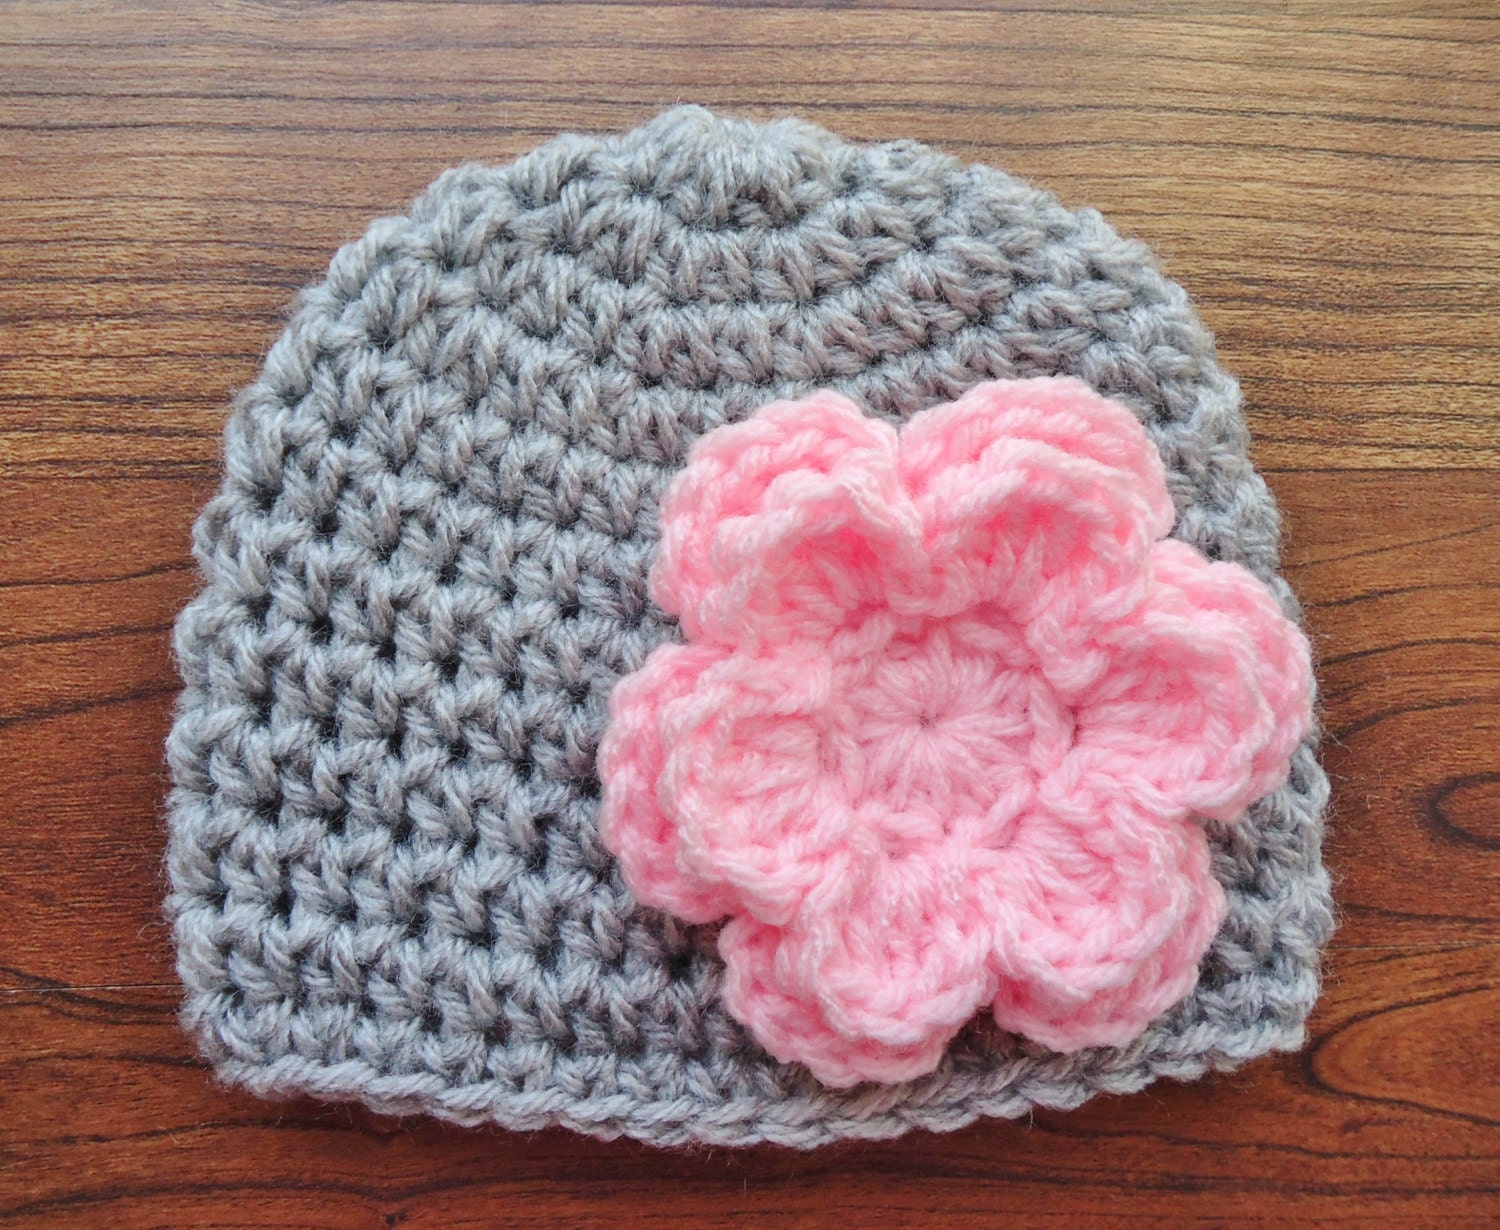 Crocheted Baby Girl Silver Gray Heather Hat with Baby Pink | Etsy